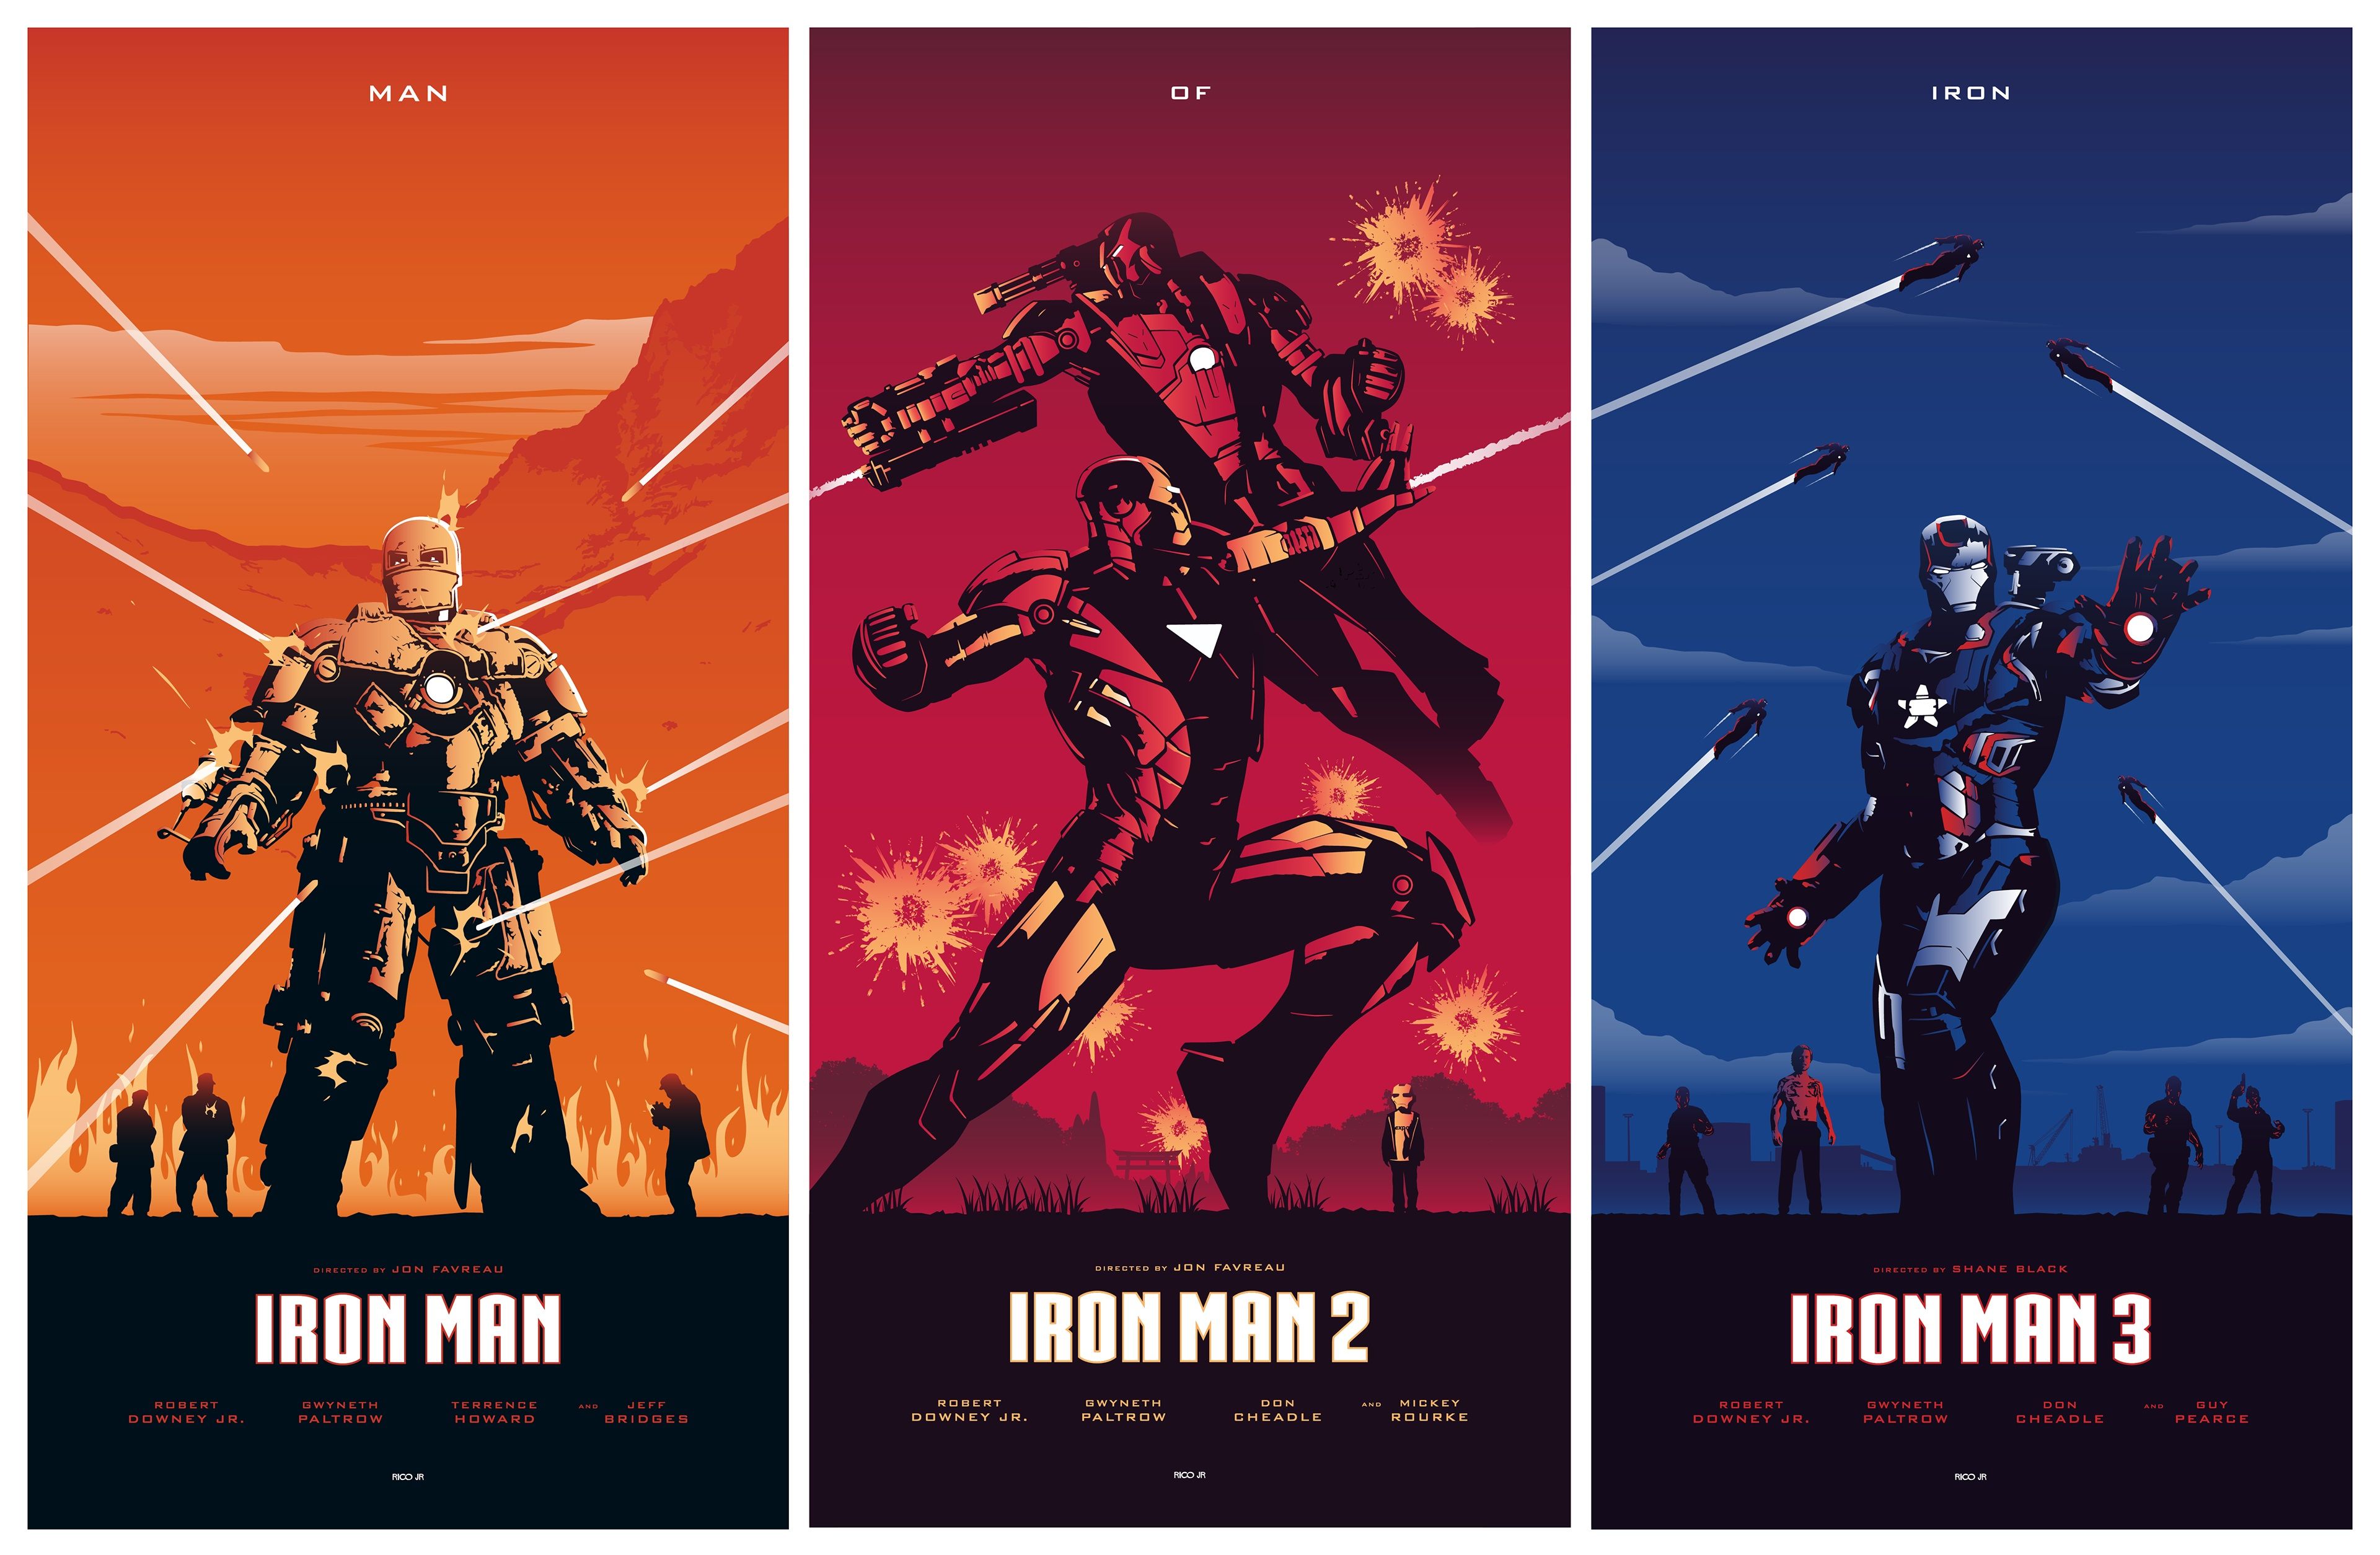 #collage, #Iron Man, #Marvel Cinematic Universe, #poster